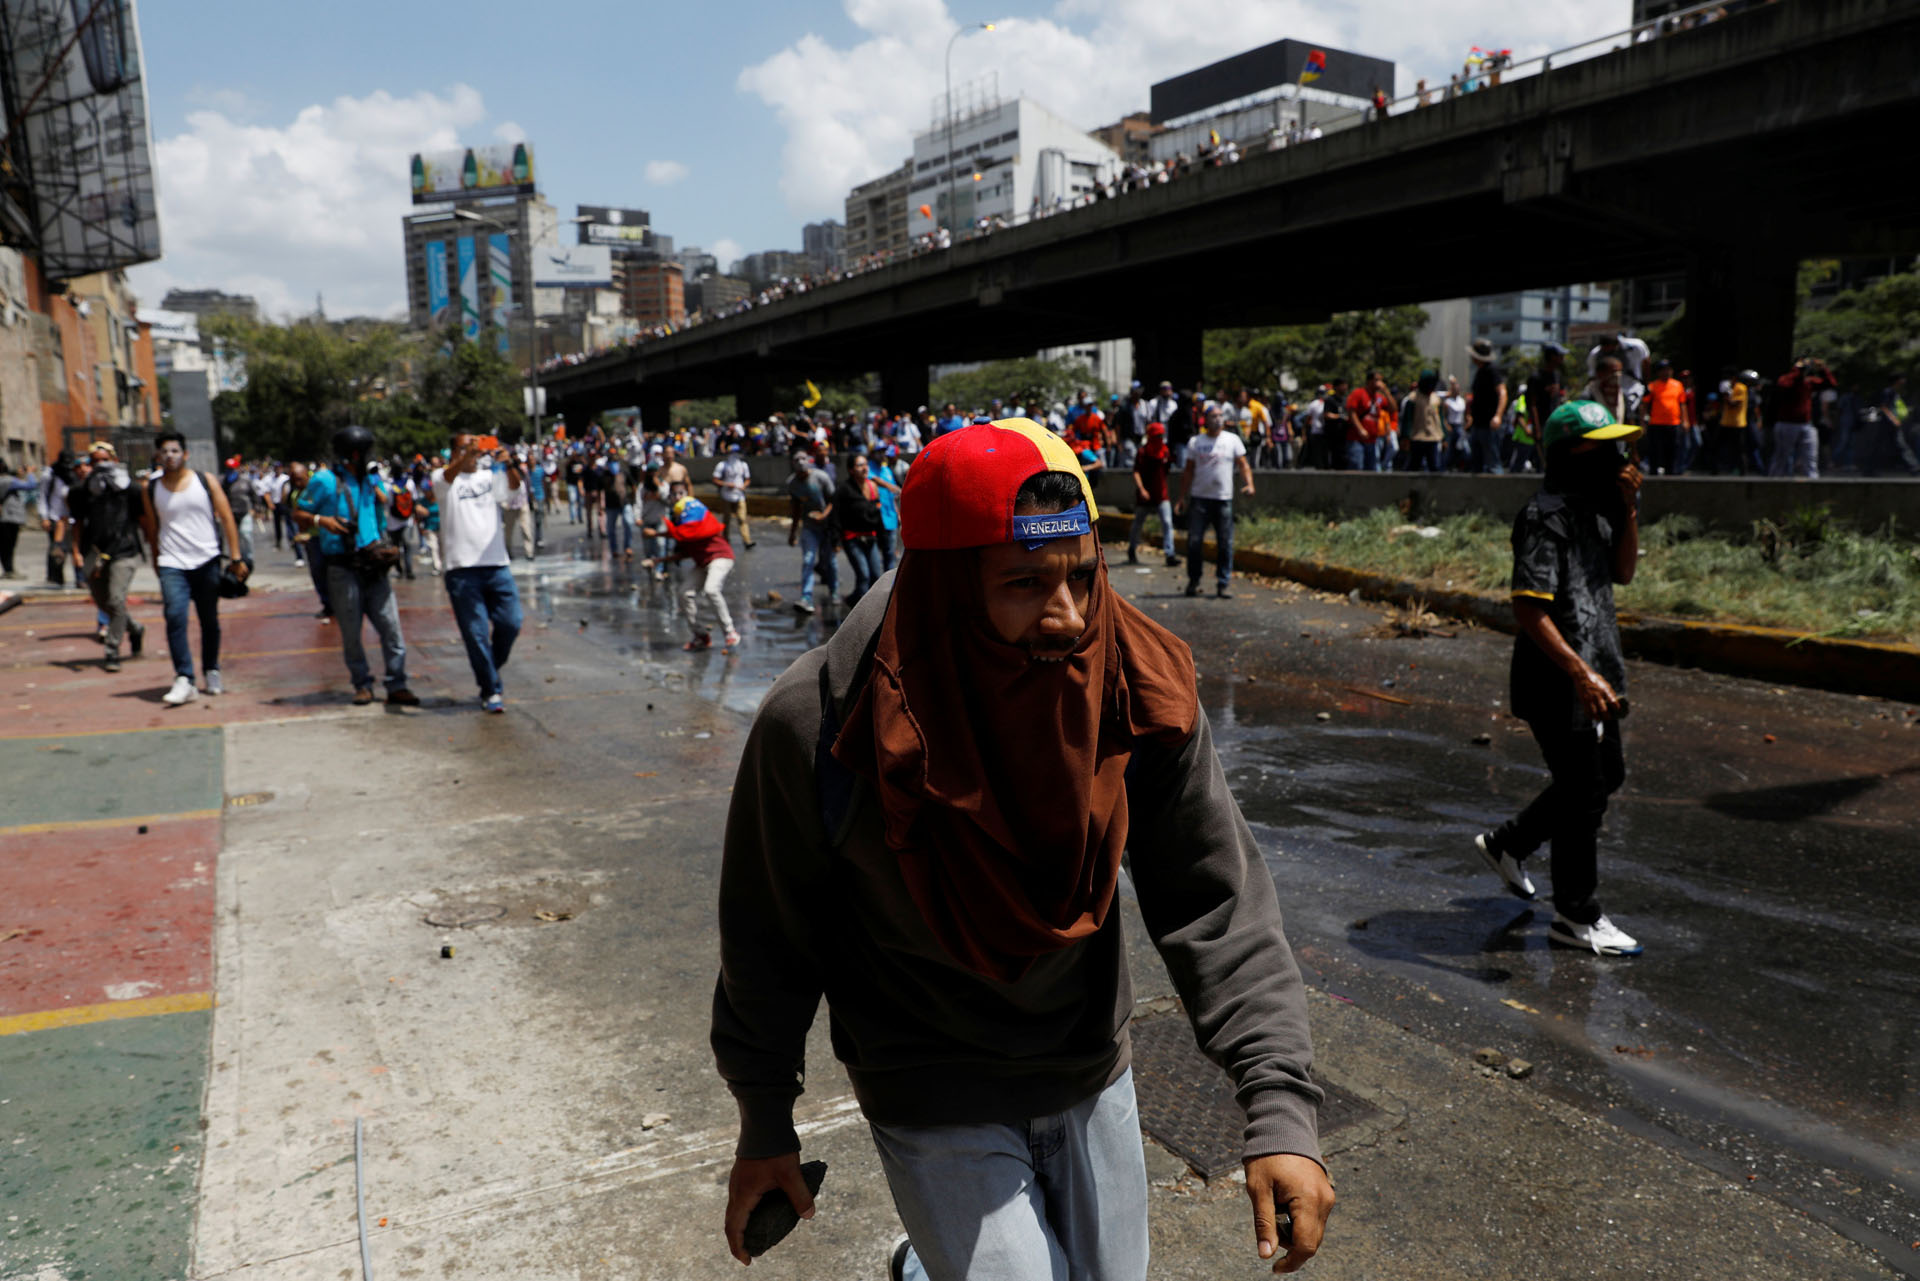 REFILE - REMOVING EXTRANEOUS WORD Demonstrators clash with security forces during an opposition rally in Caracas, Venezuela April 6, 2017. REUTERS/Carlos Garcia Rawlins